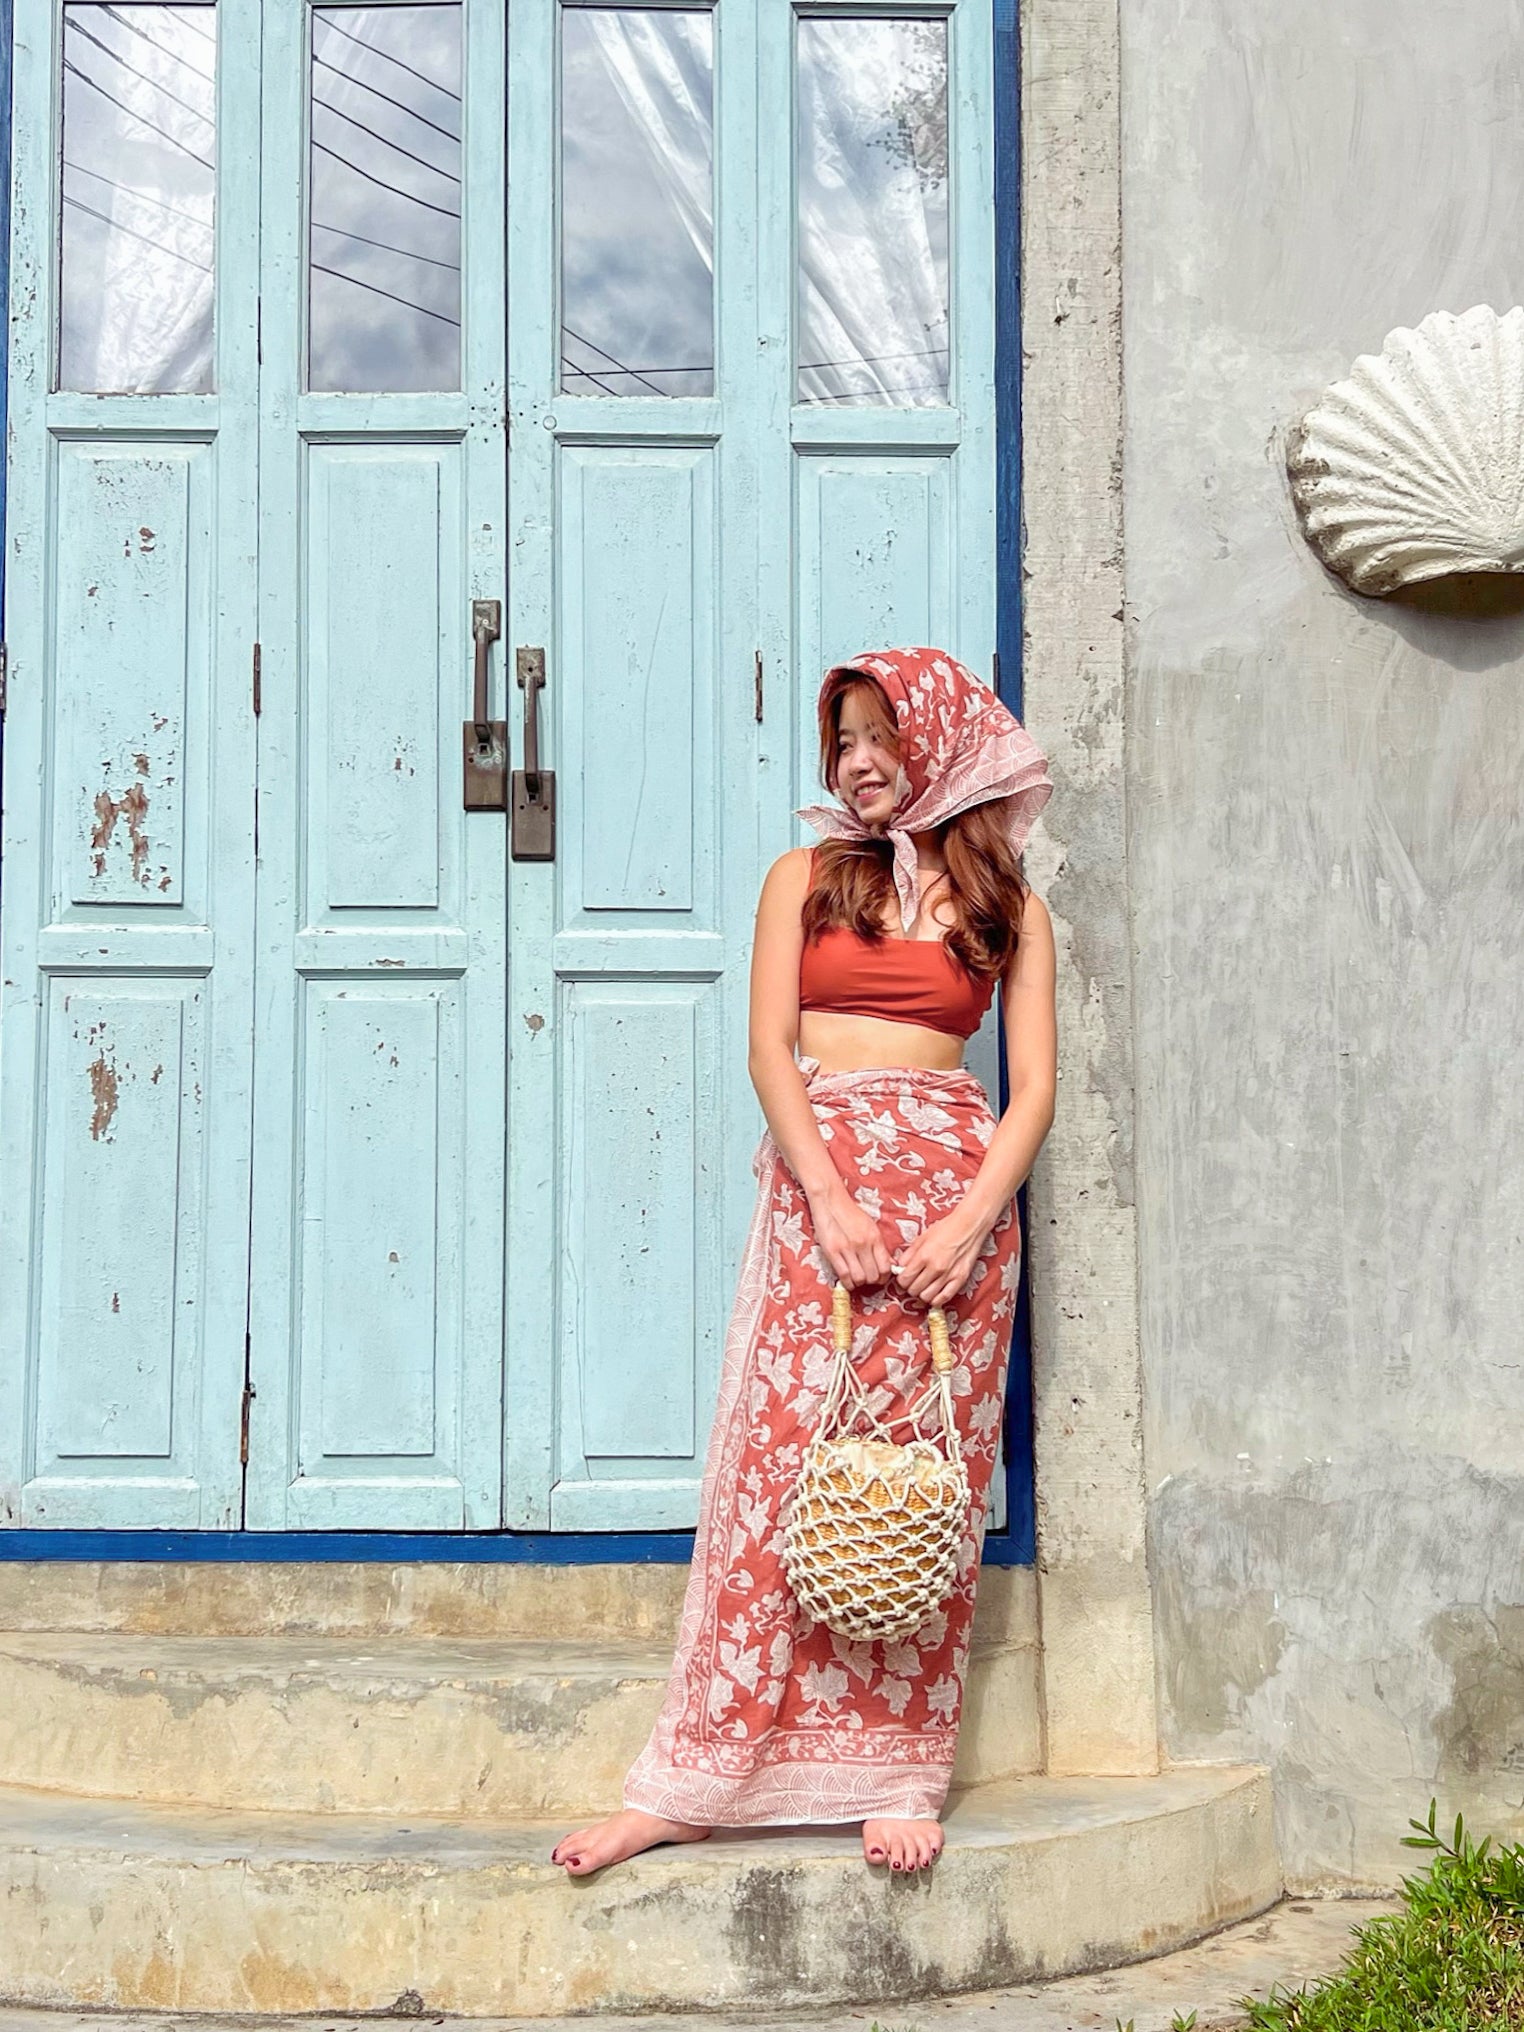 Cotton Tropical Sarong, Bougainvillea Sarong Crafted with love by our artisans in Jaipur, this cotton sarong is ideal for celebrating life's unforgettable moments - from lounging on the sand to dancing on the beach. Wear it as a wrapped dress or a skirt 